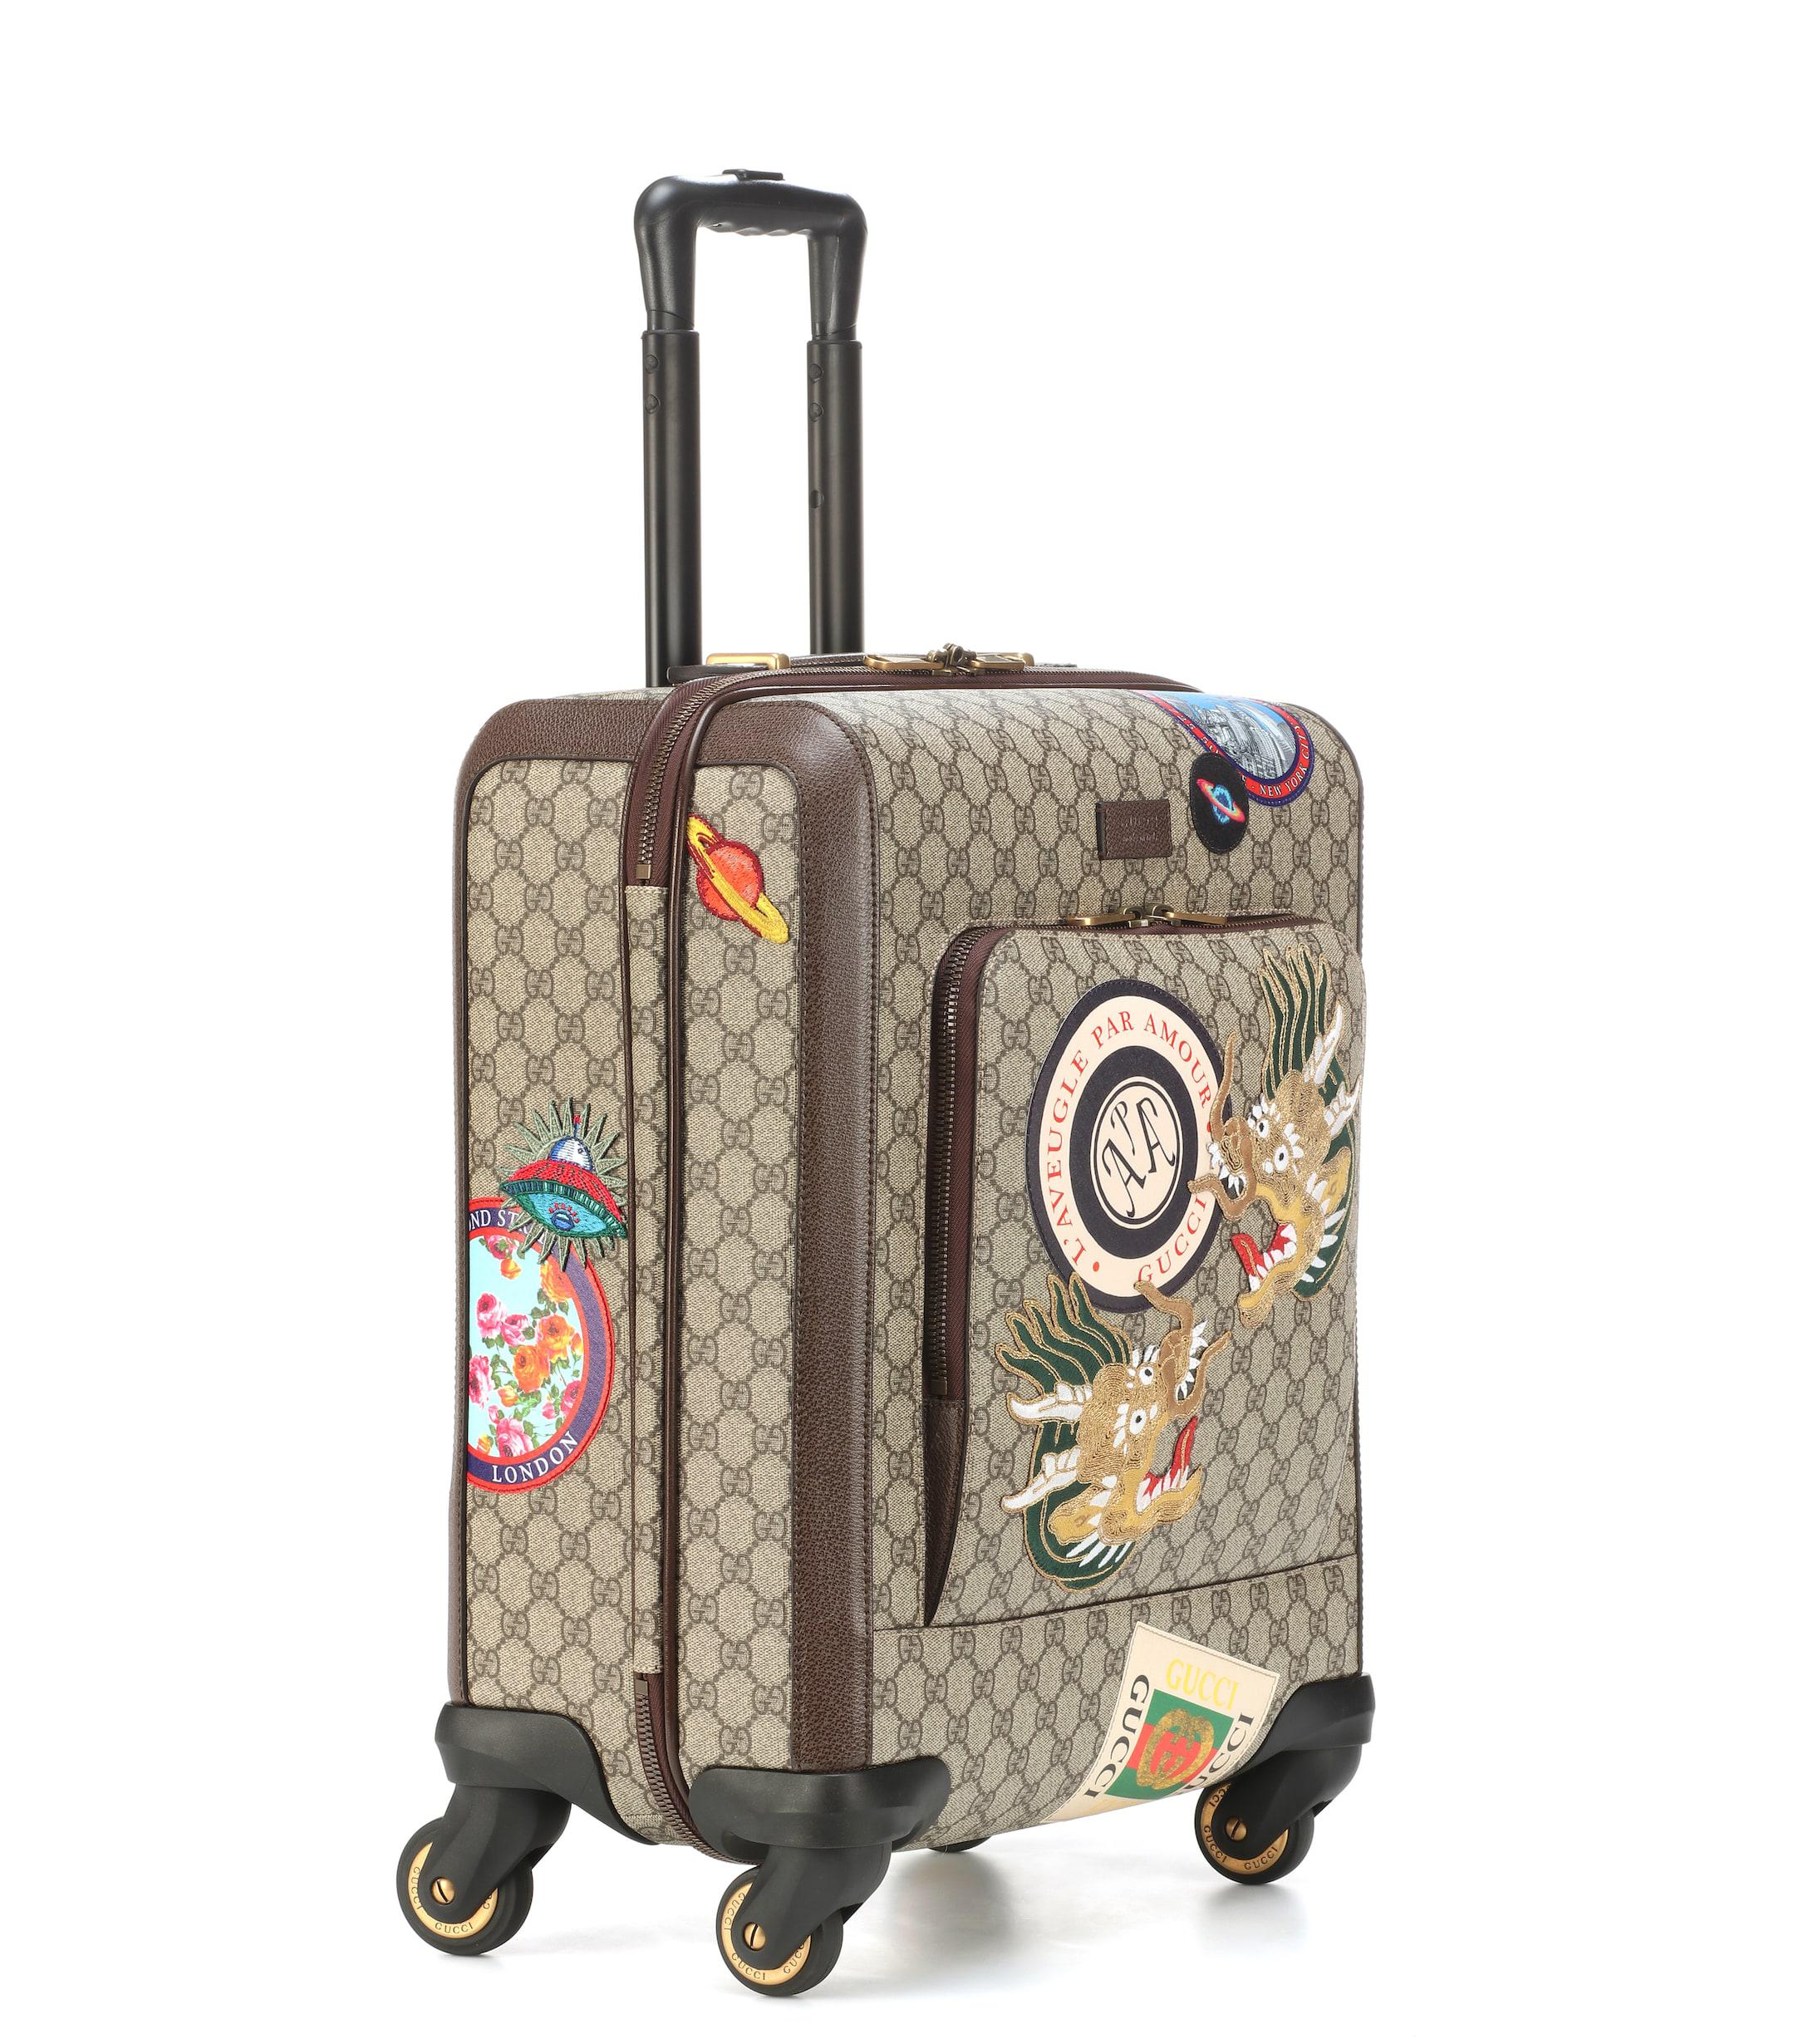 GUCCI GG Supreme Monogram Four Wheel Carry On Suitcase White Brown 1173515